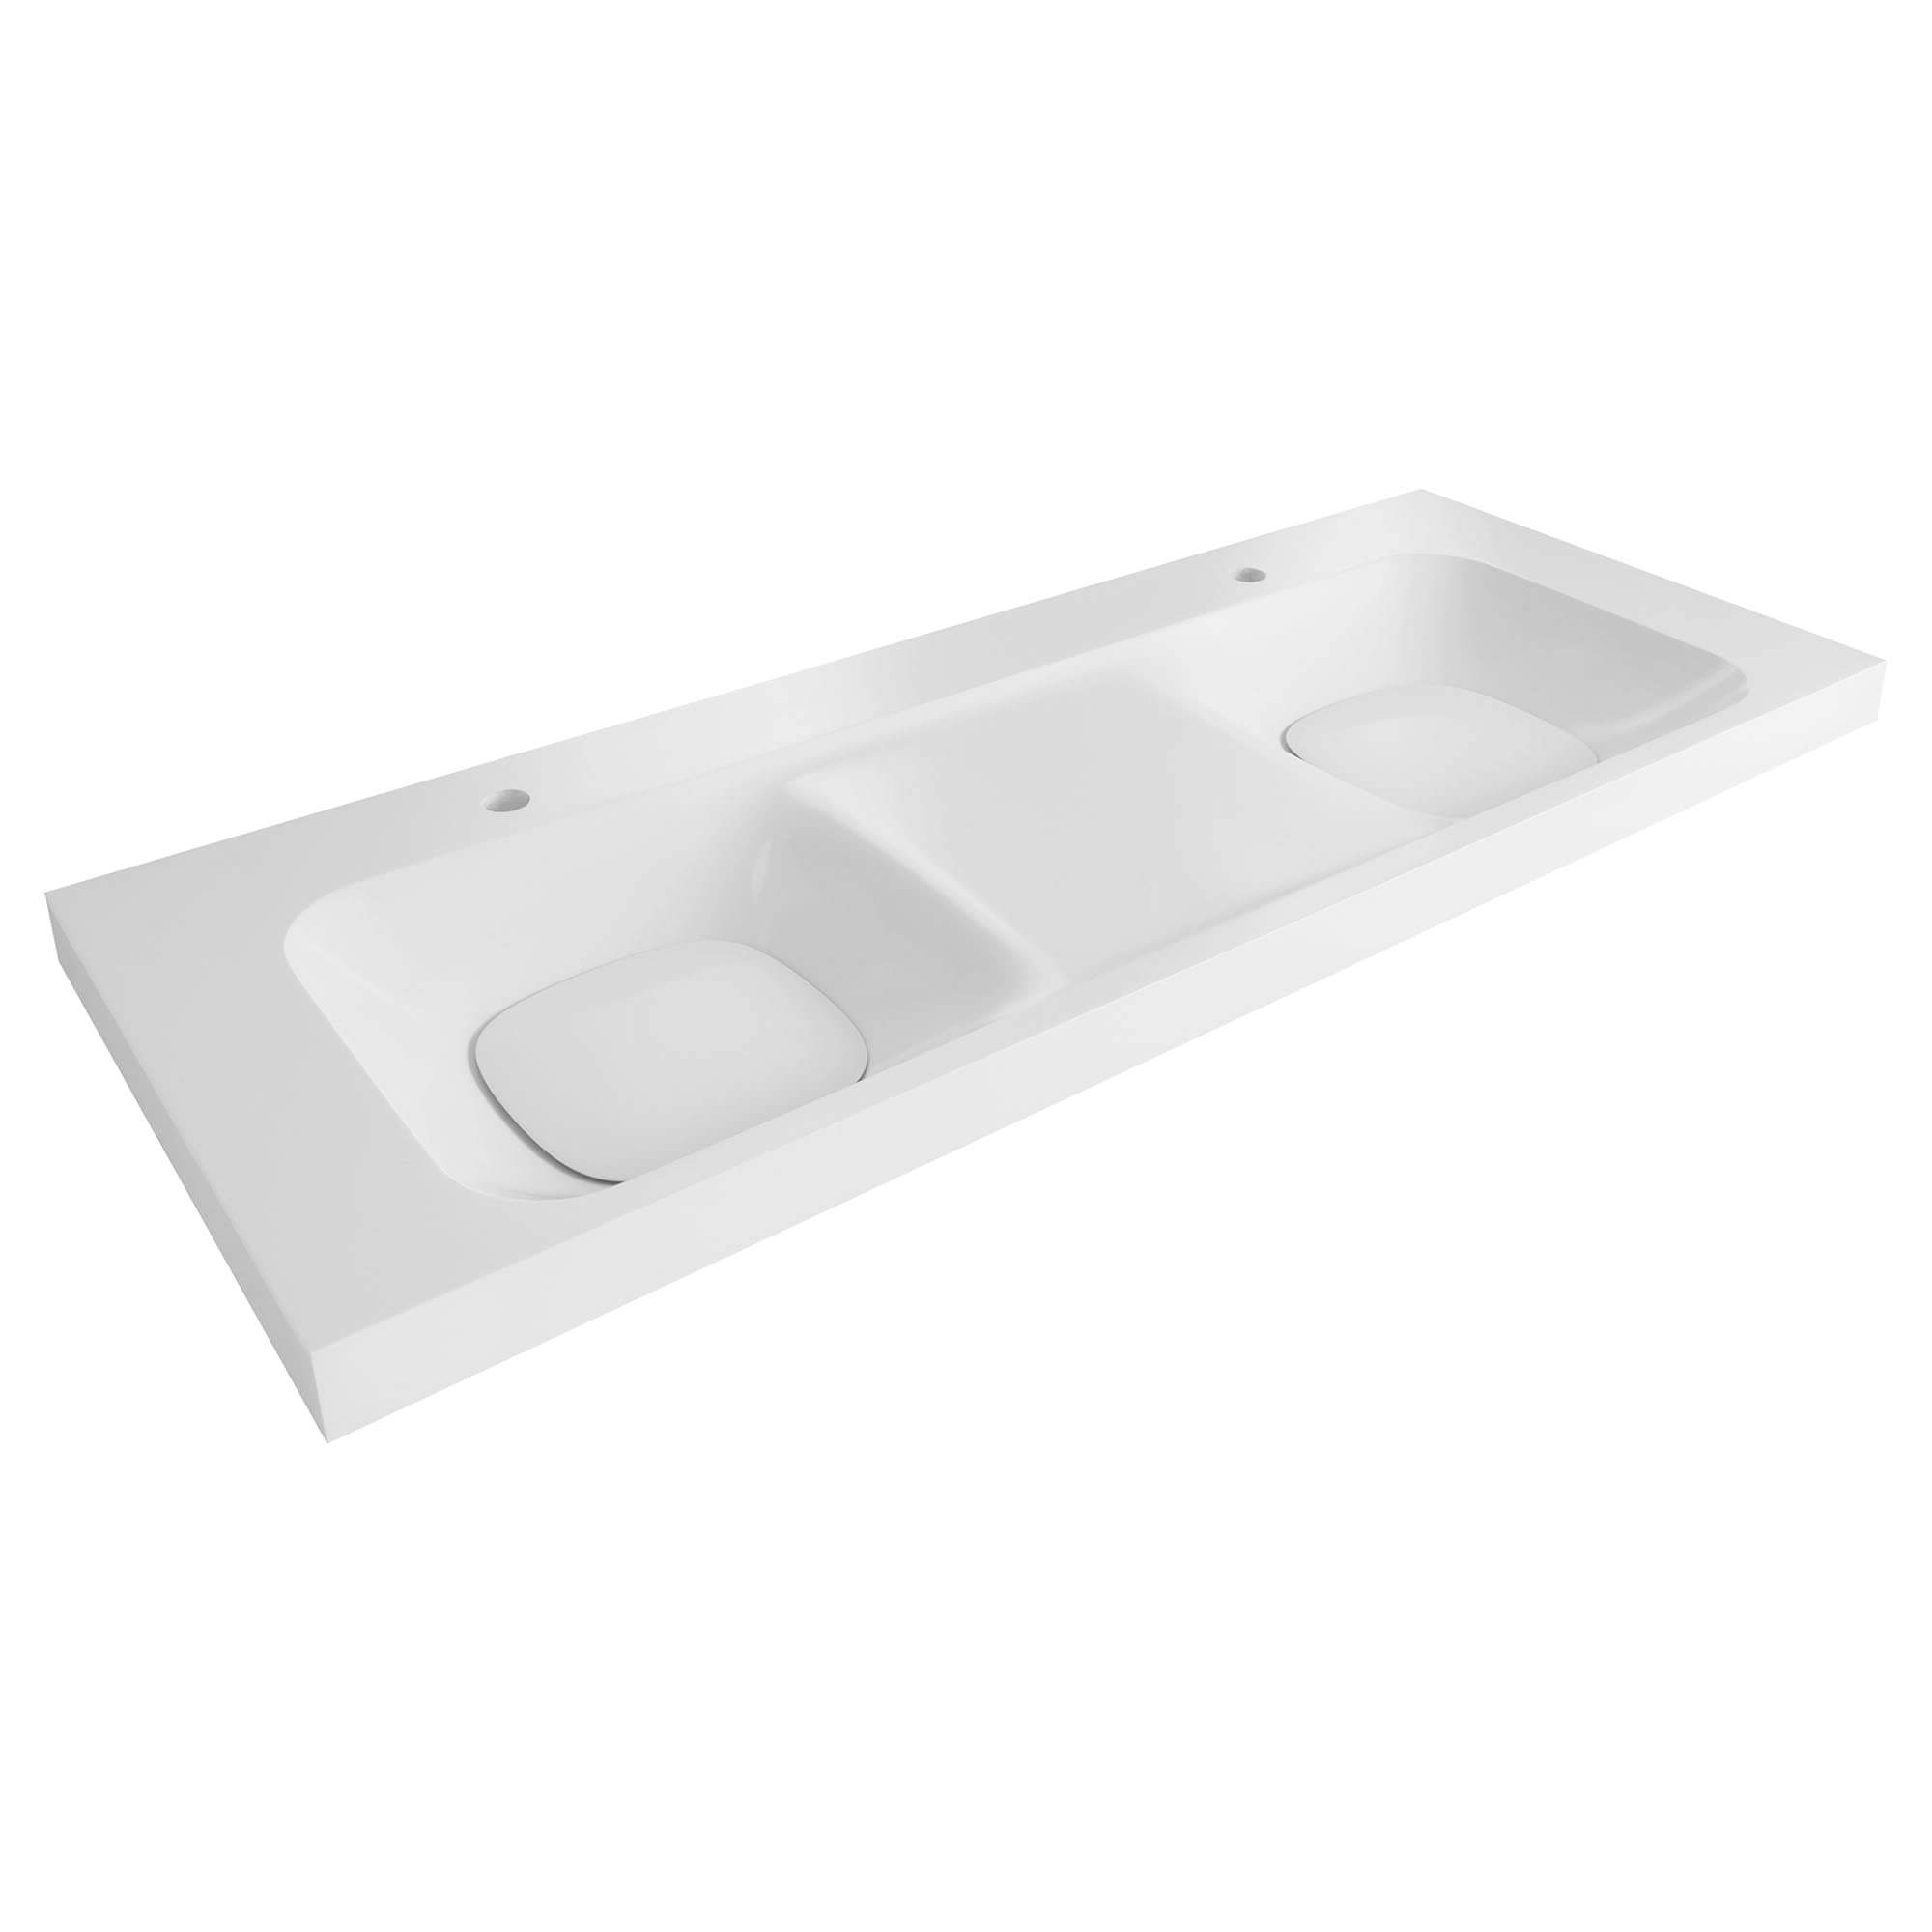 DXV MODULUS 55-INCH DOUBLE BATHROOM SINK - TWO SINGLE-HOLES